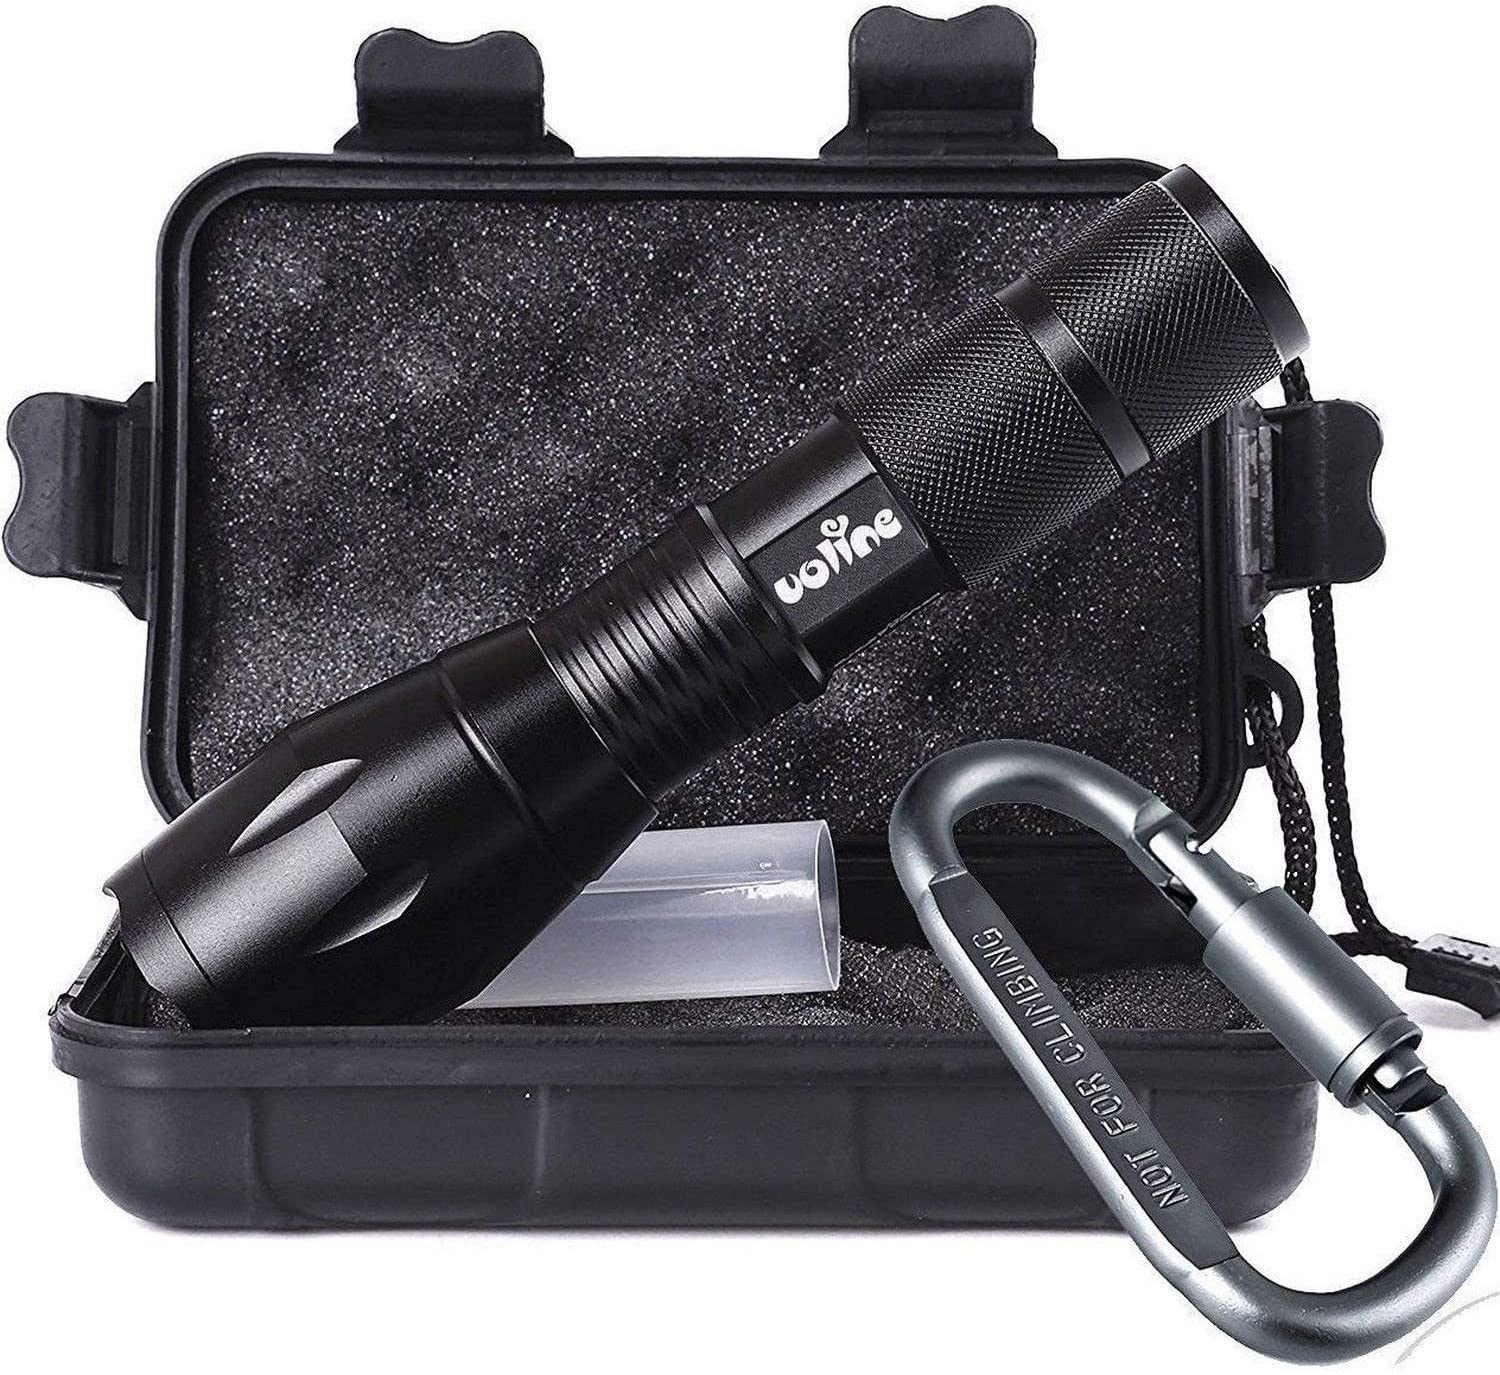 Tactical Portable LED Flashlight with High Lumens – Just $33.99 at Amazon